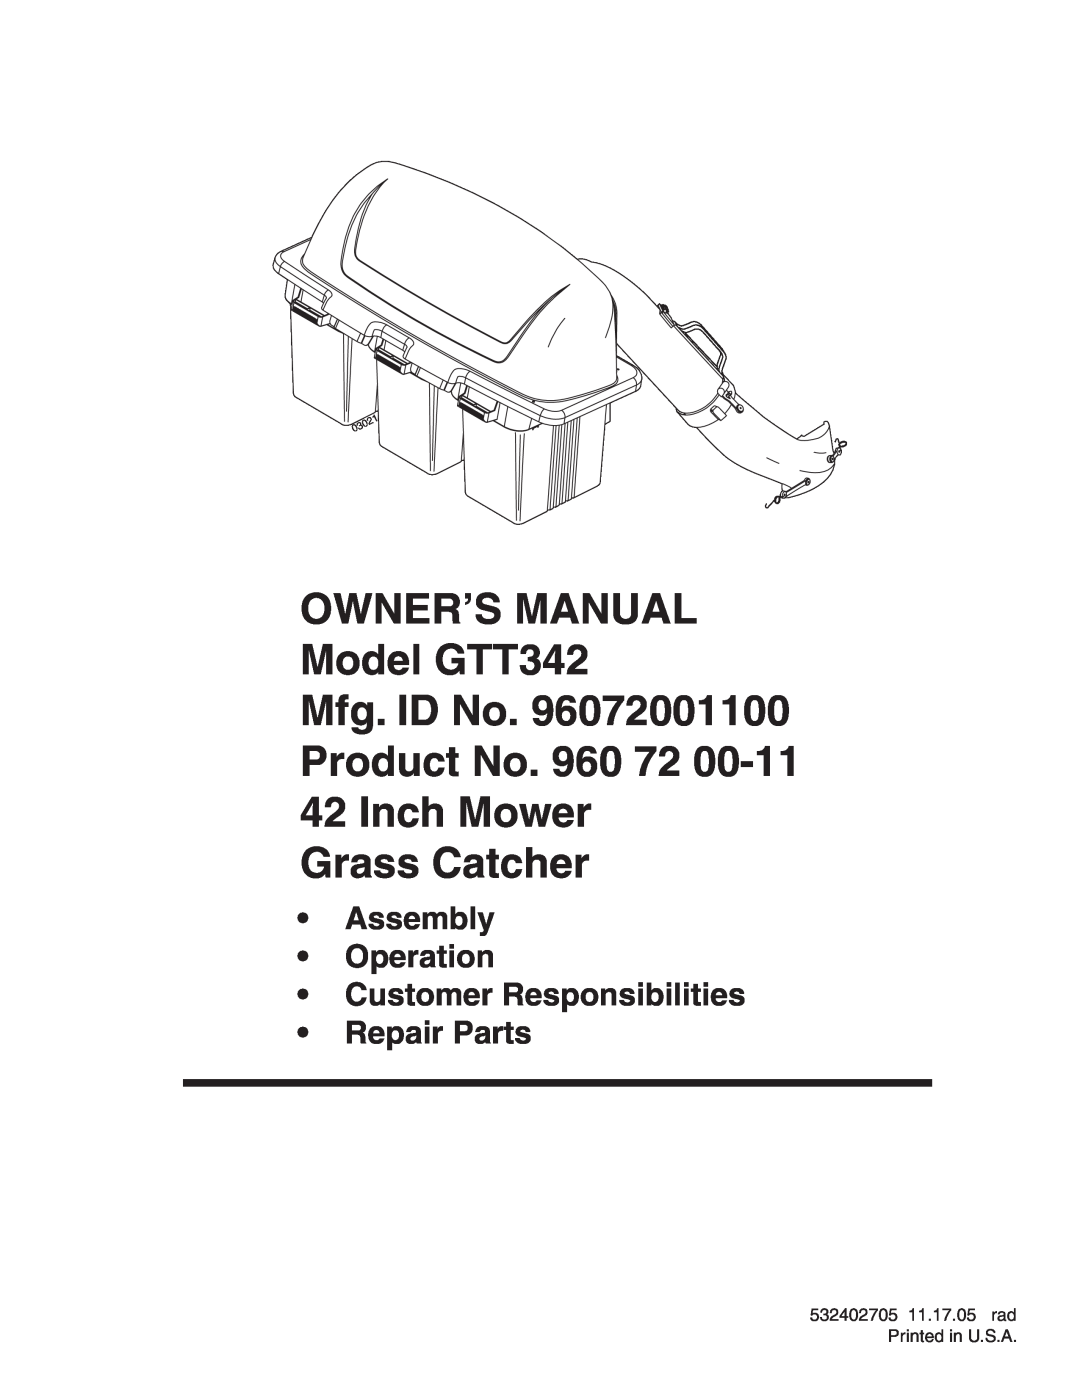 Poulan 96072001100 owner manual OWNER’S MANUAL Model GTT342 Mfg. ID No Product No. 960 72, Inch Mower Grass Catcher 